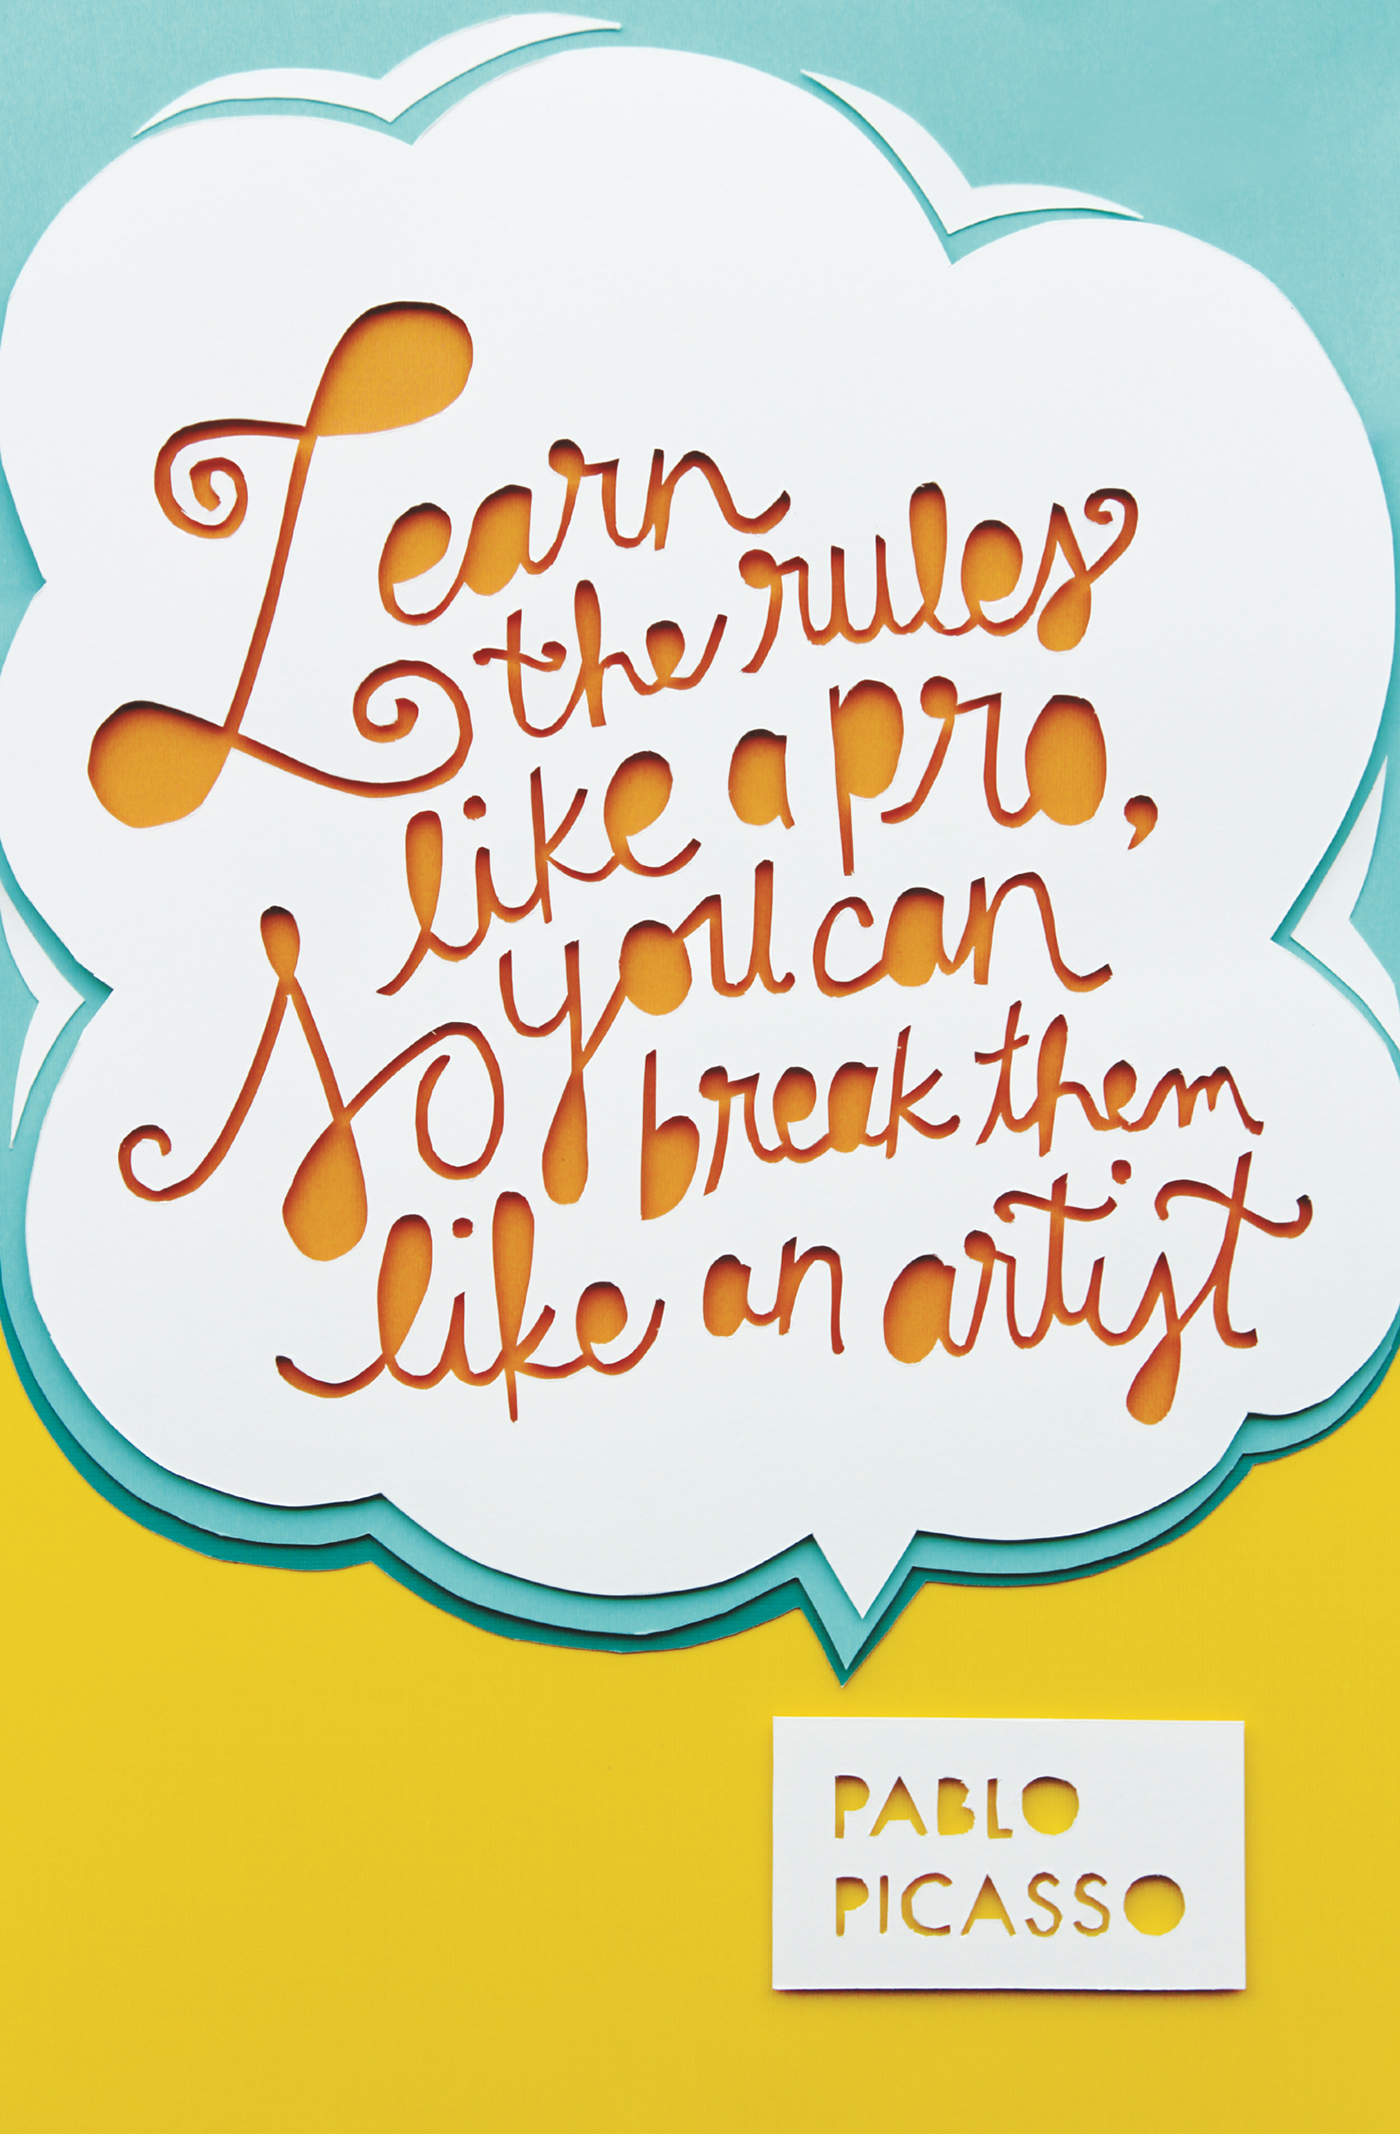 Picasso quote hand-cut lettering poster color whimsical posters hand-made